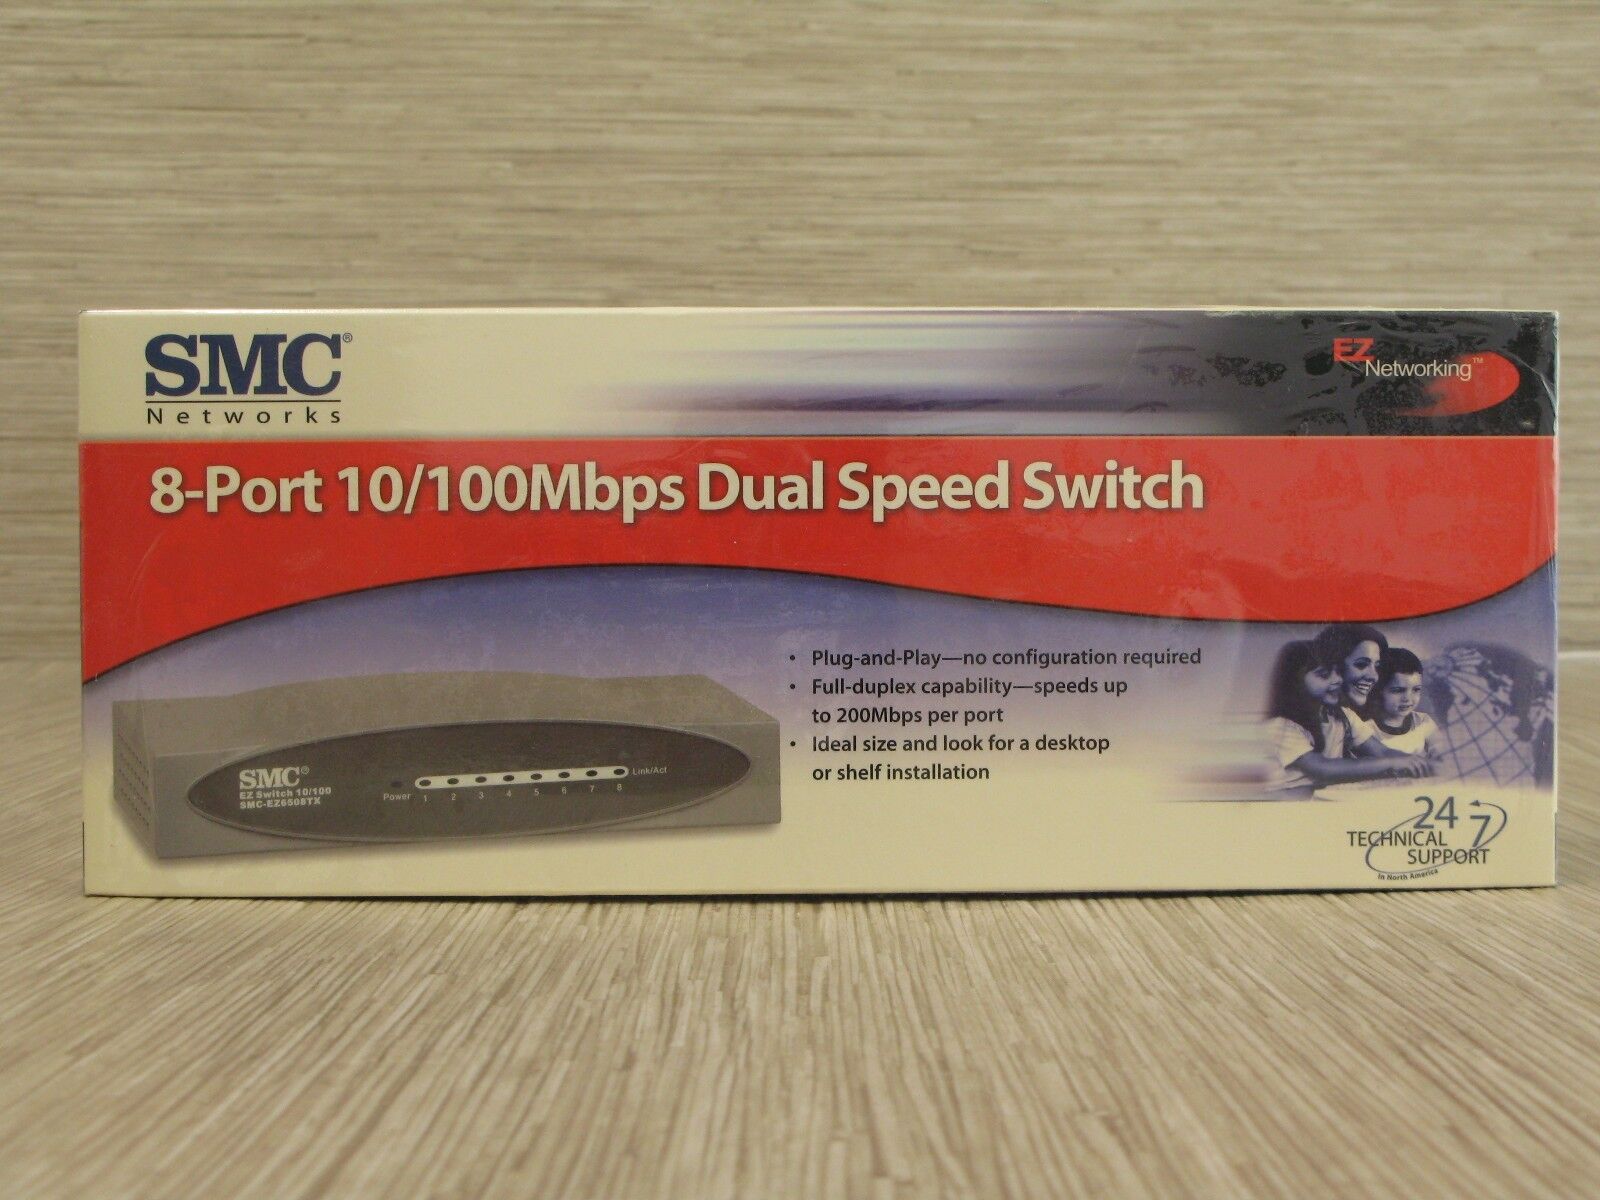 SMC Networks 8-Port 10/100Mbps Dual Speed Switch Black Gray Plug And Play 